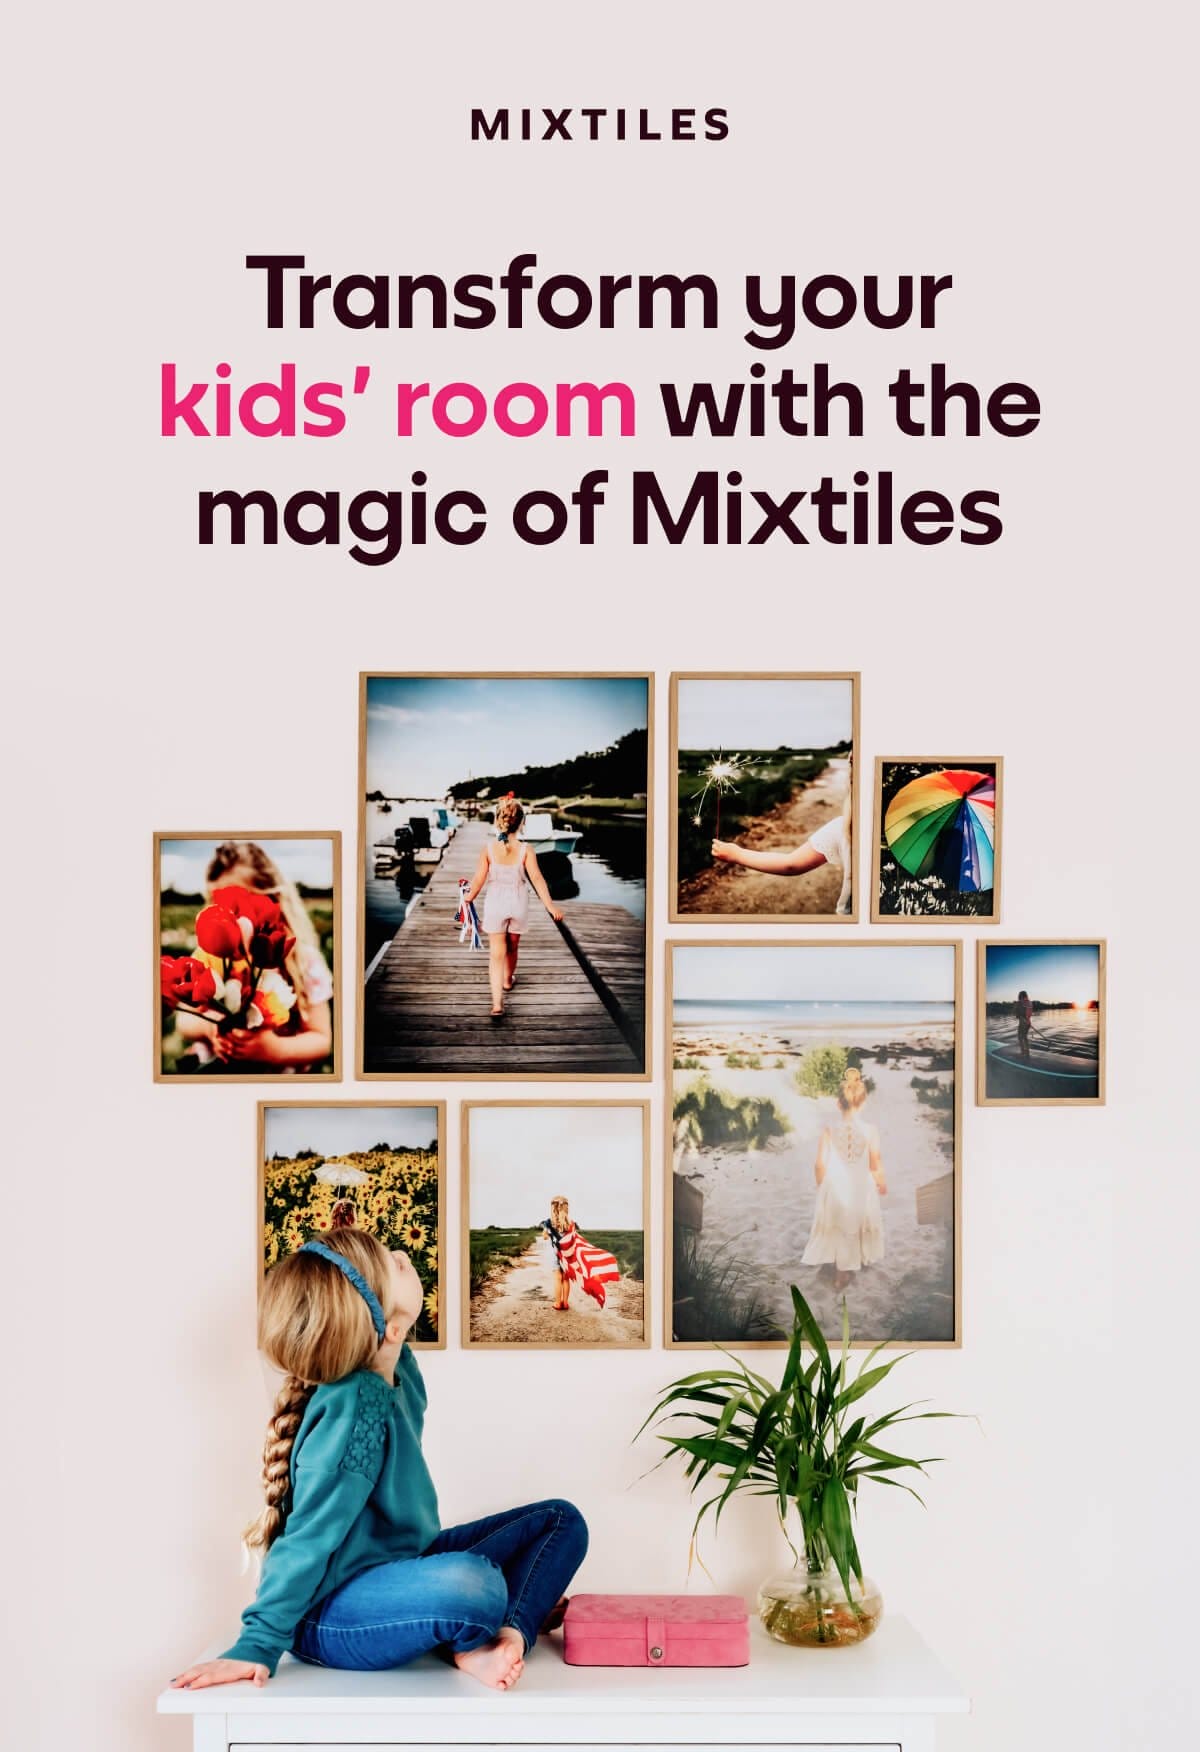 [MIXTILES] Transform the kids' room with Mixtiles. | ORDER NOW